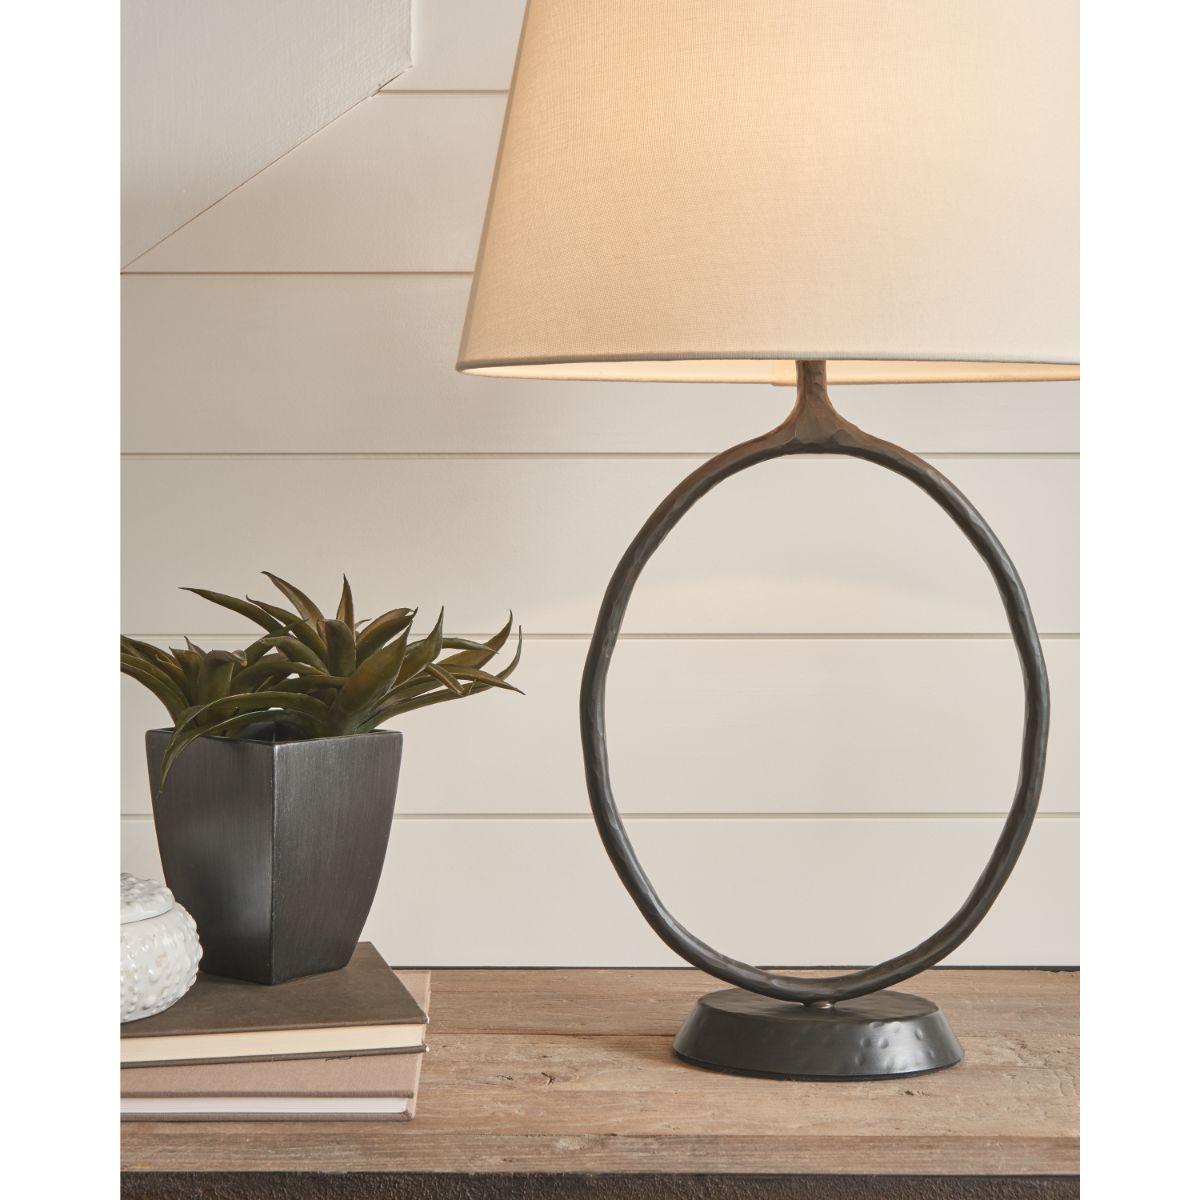 Indo Table Lamp Rustic Aged Iron Finish - Bees Lighting